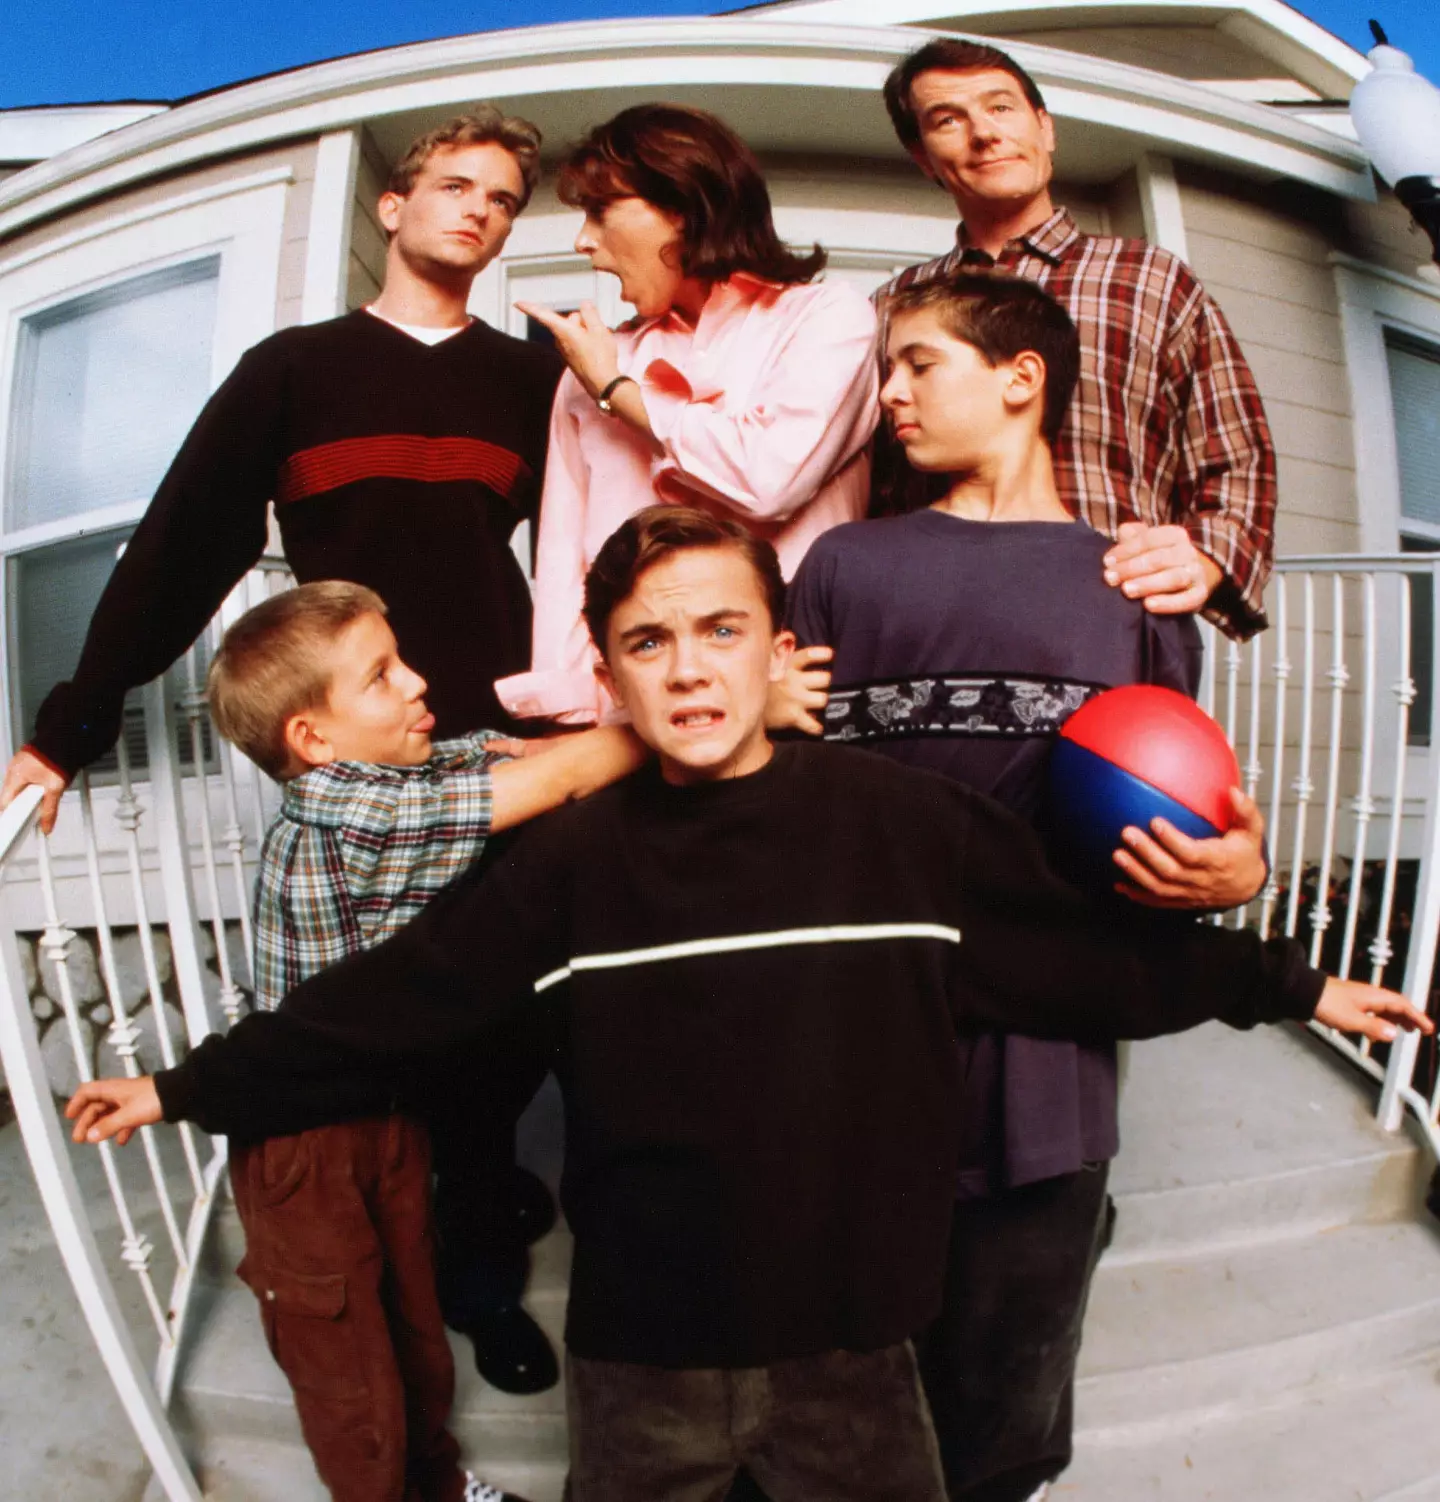 Malcolm in the Middle was a staple of the early-2000s TV schedule.